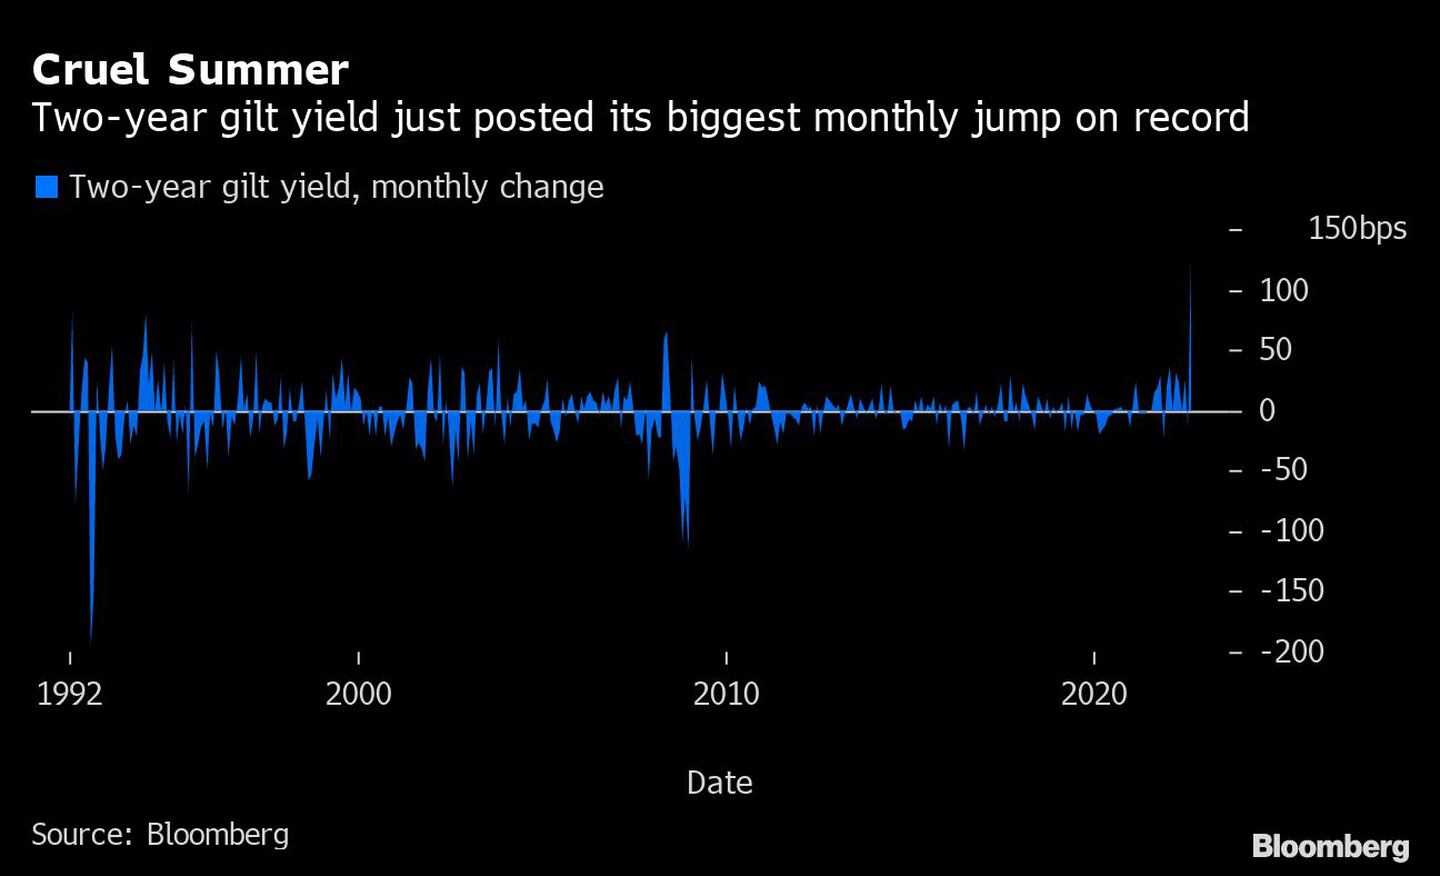 Brutal Heat |  The Two-Year Gilt Yield Recently Posted Its Biggest Monthly Jump On Record Dfd